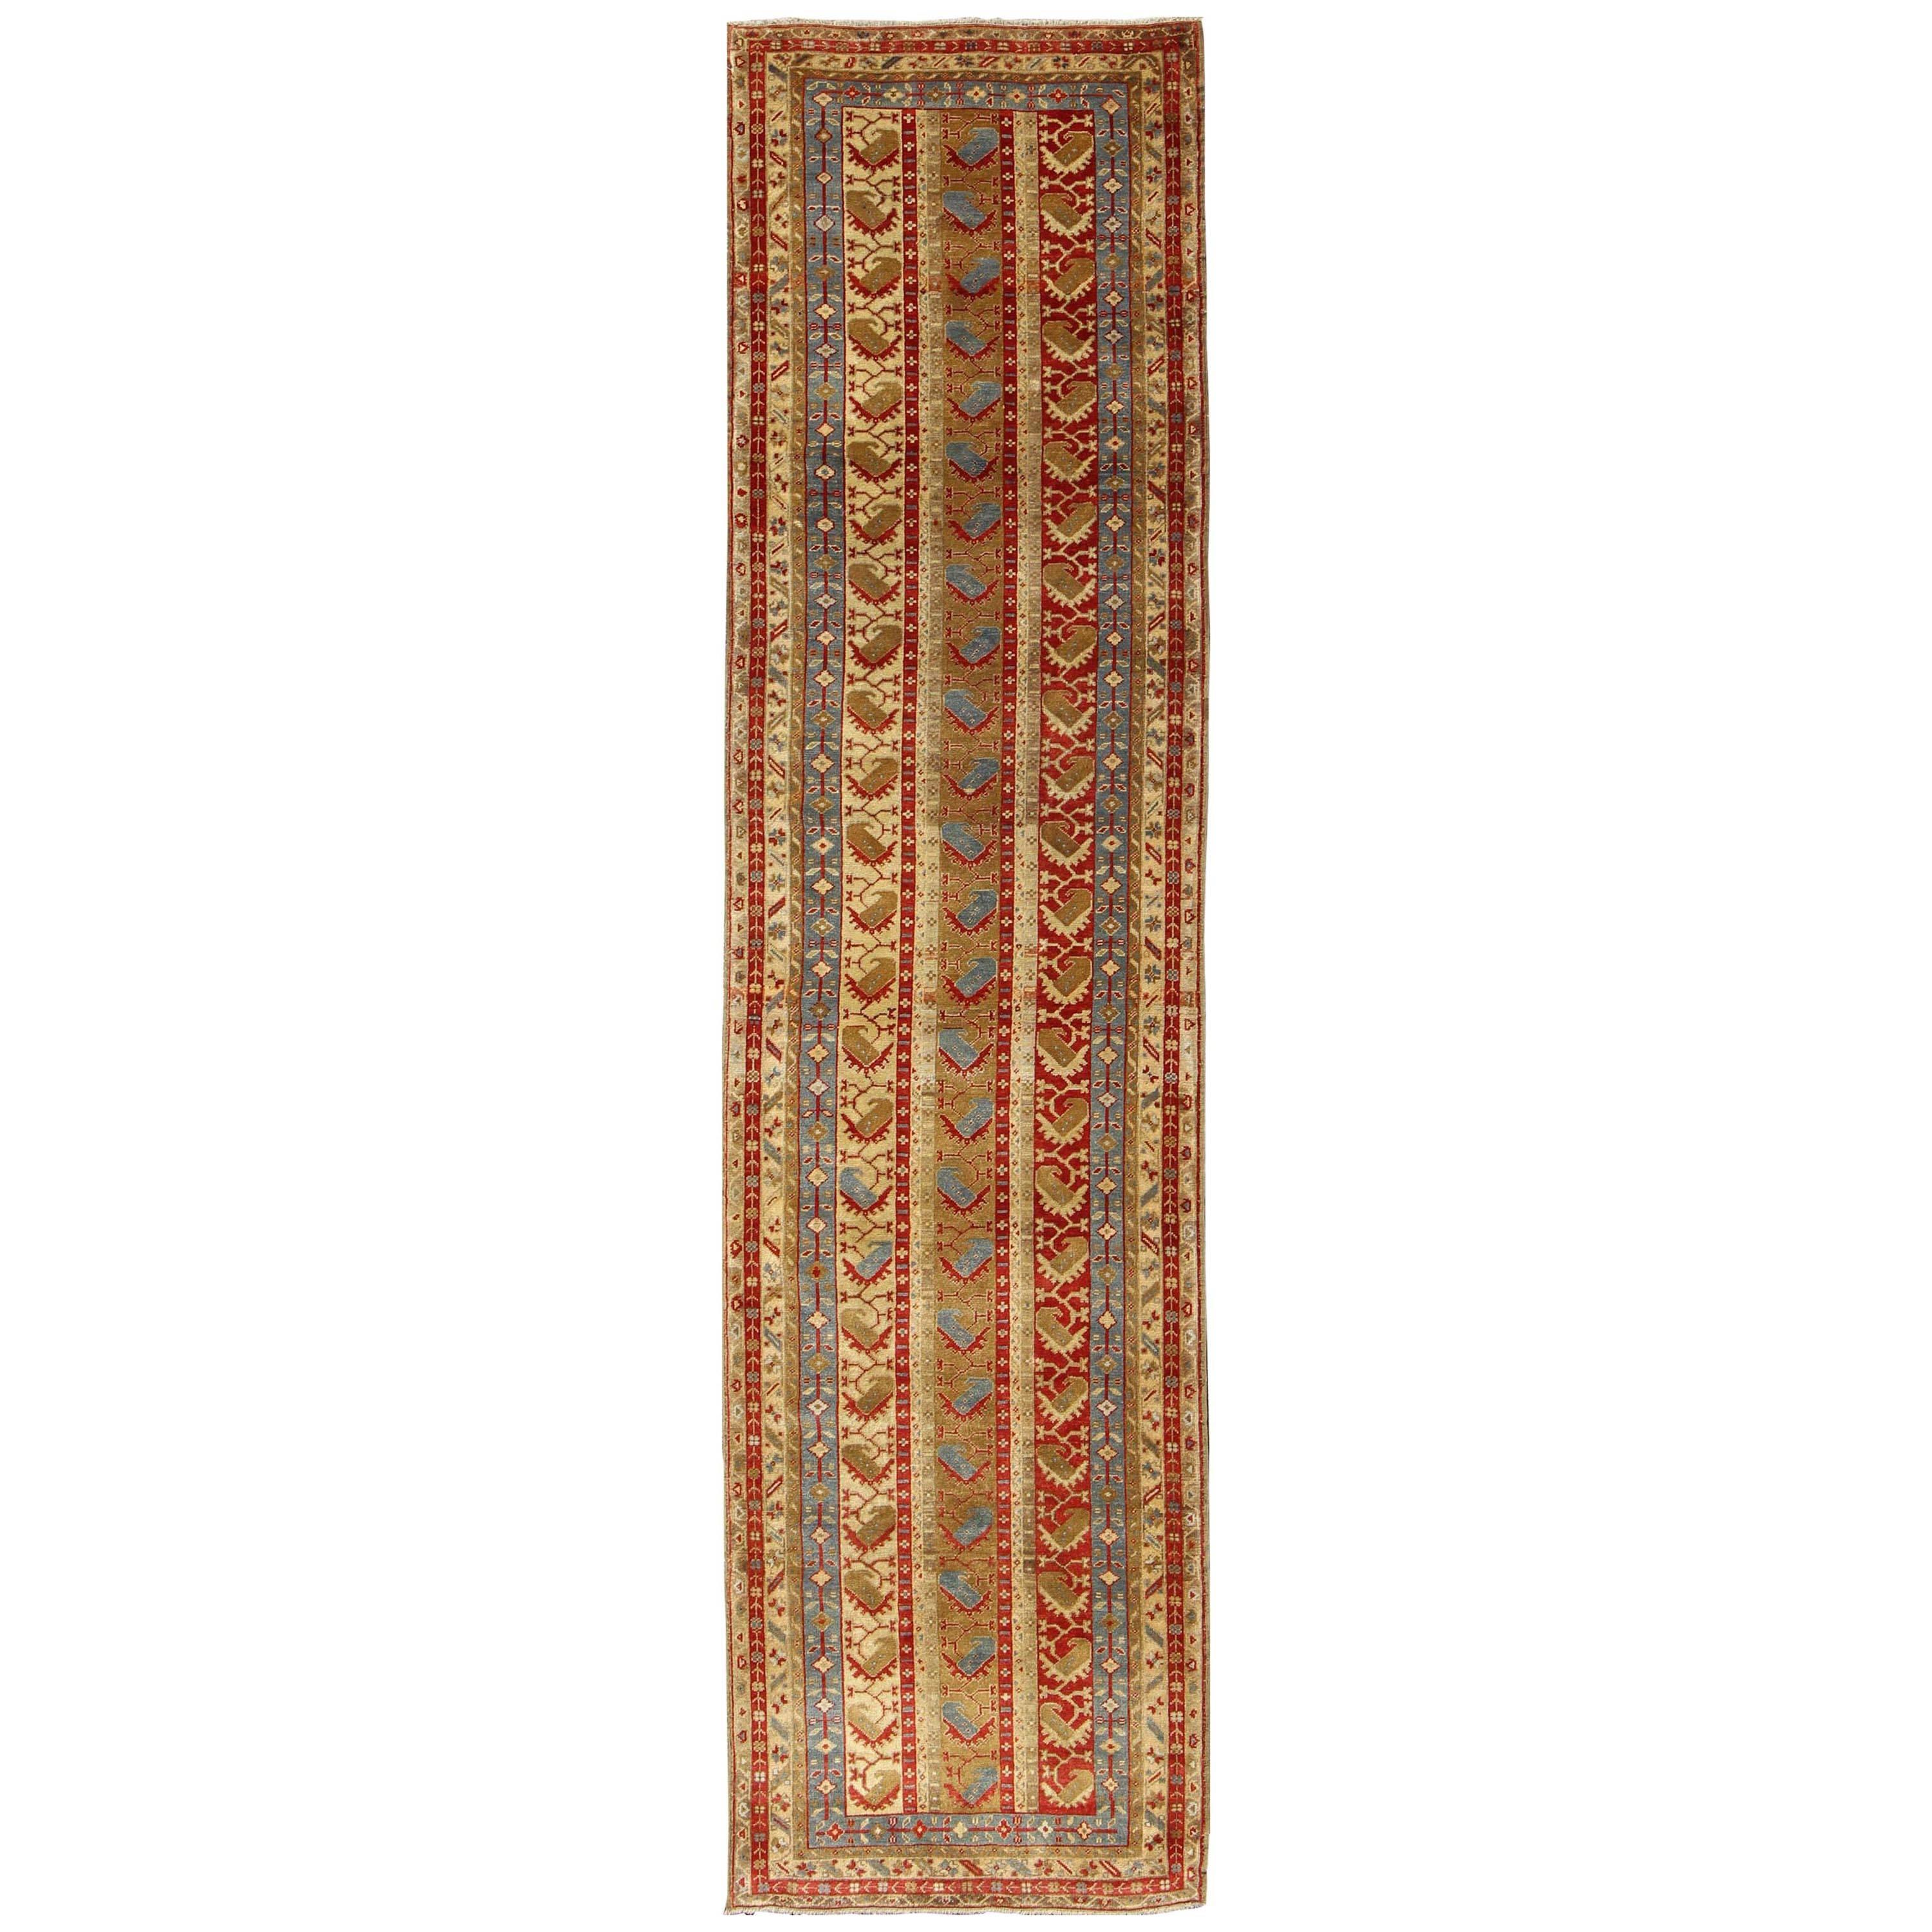 Colorful and Unique Antique Turkish Oushak Runner with Stripes Design